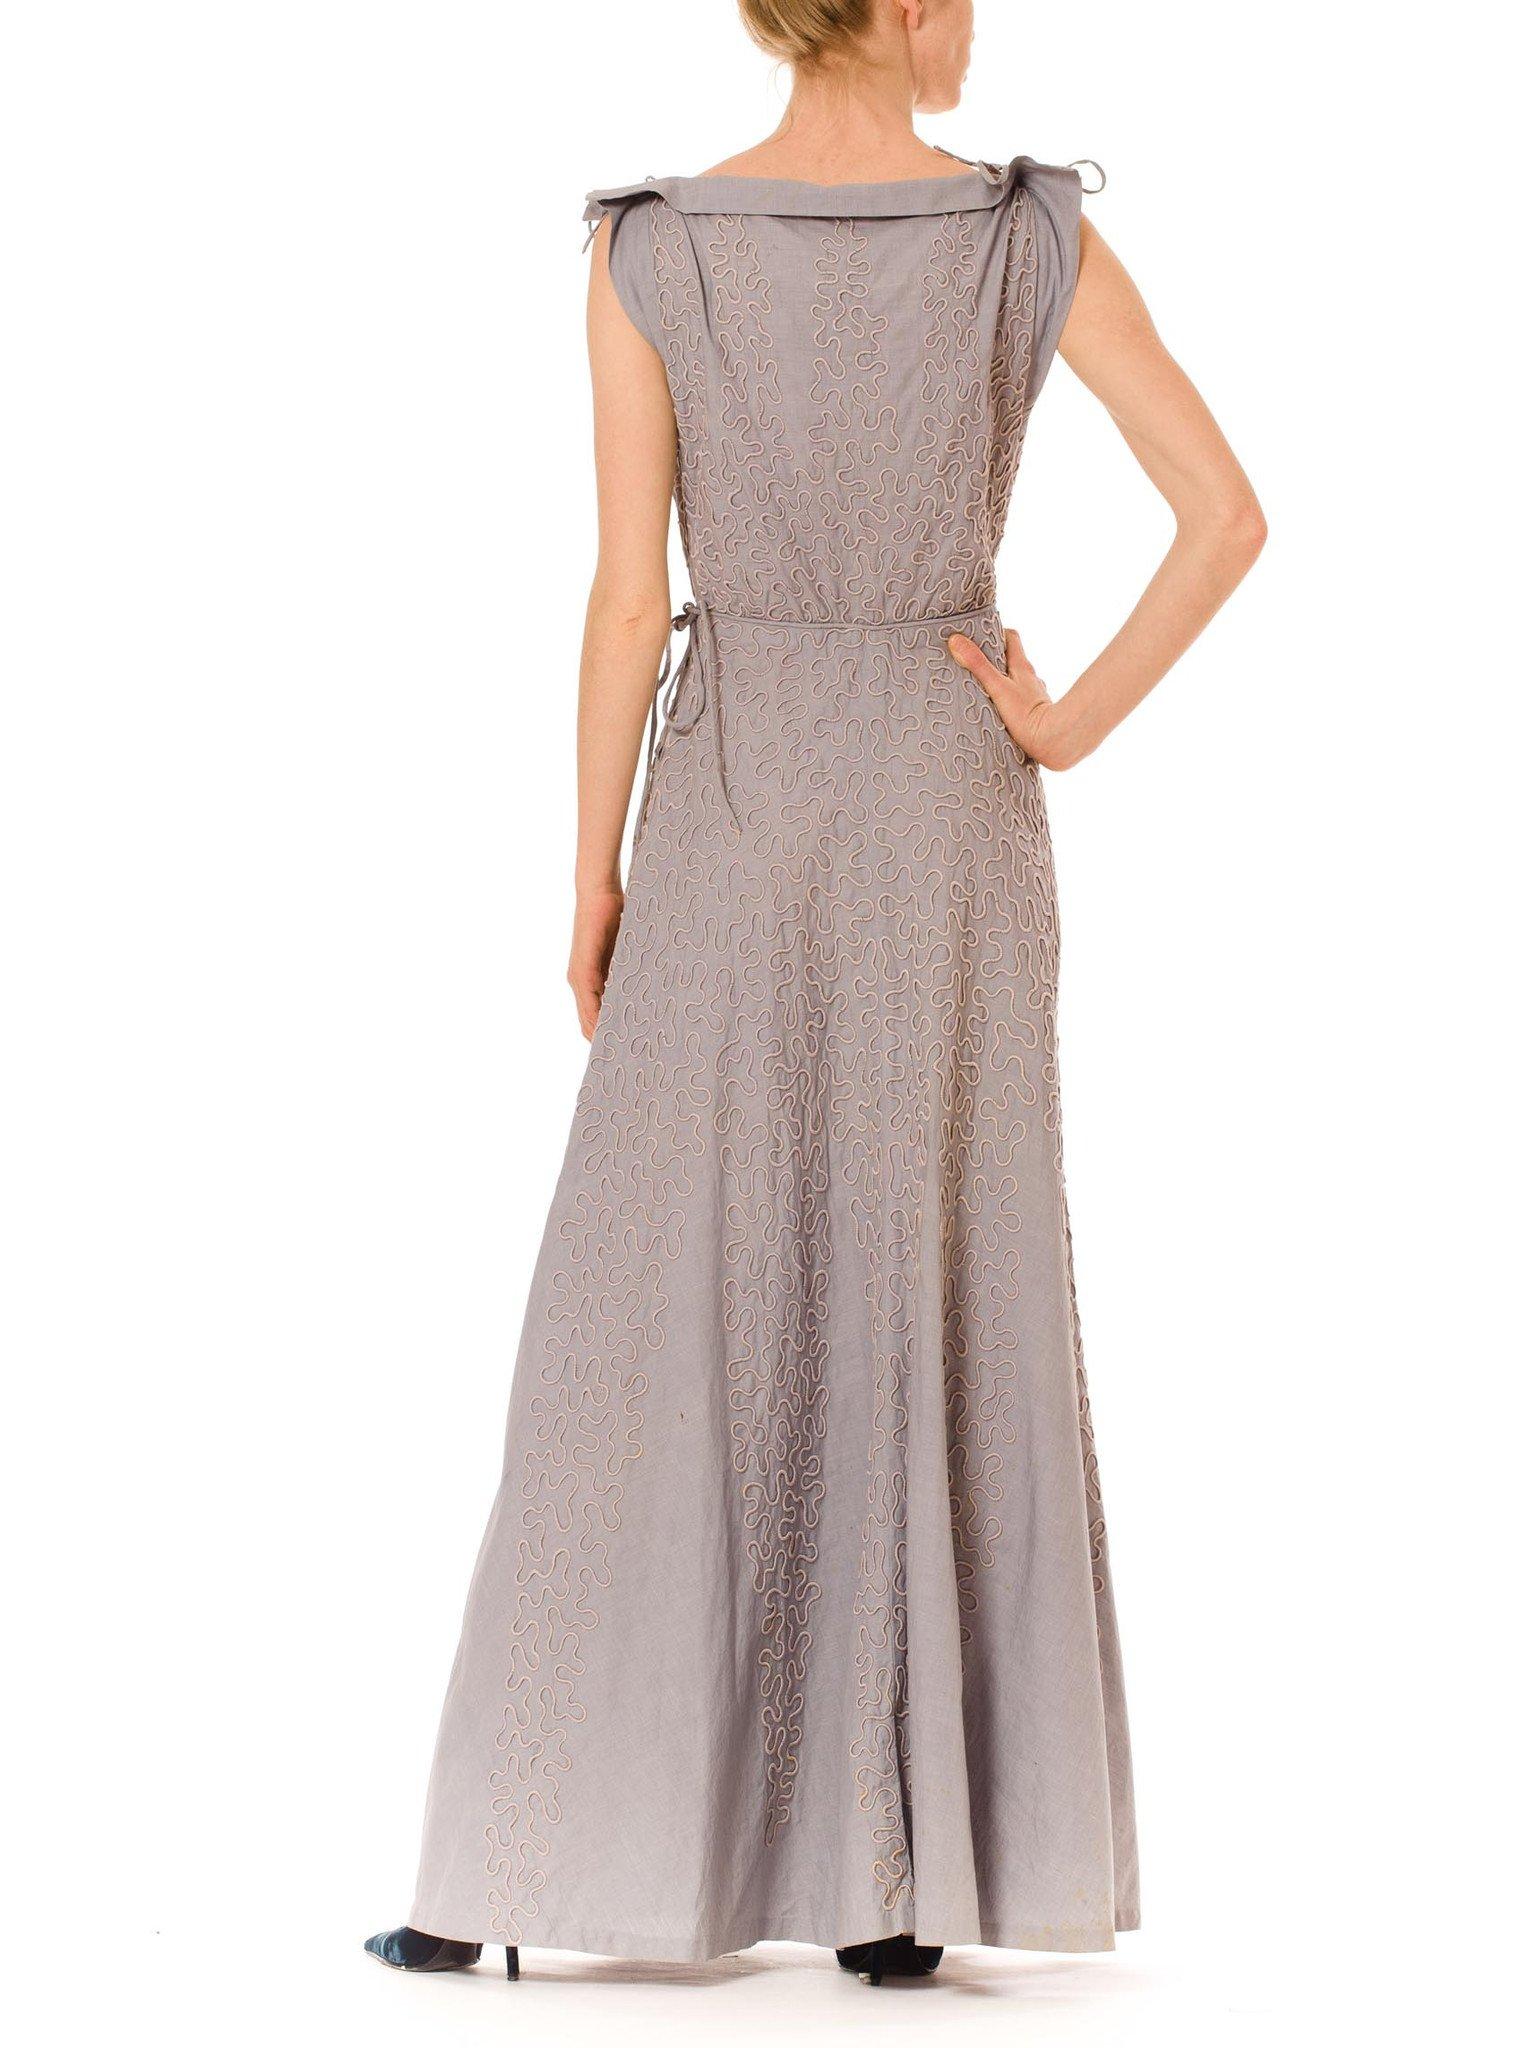 1940S OMAR KIAM Dove Grey Cotton Elaborately Embroidered Summer Gown With Shoulder & Waist Ties